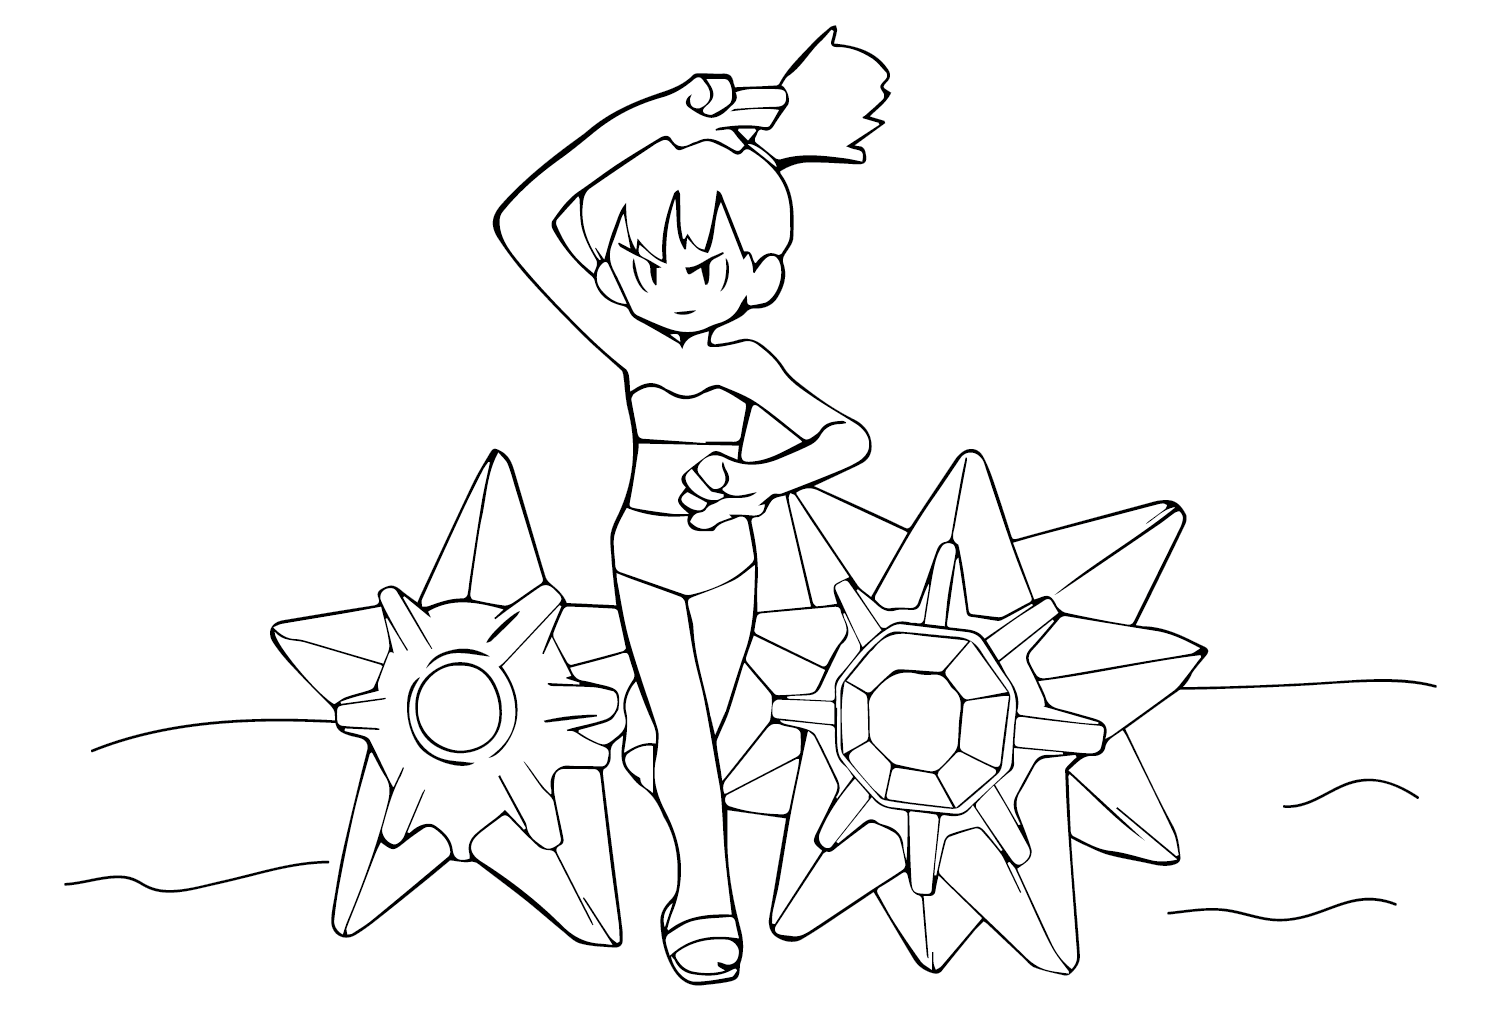 Misty Coloring Sheet for Kids from Misty